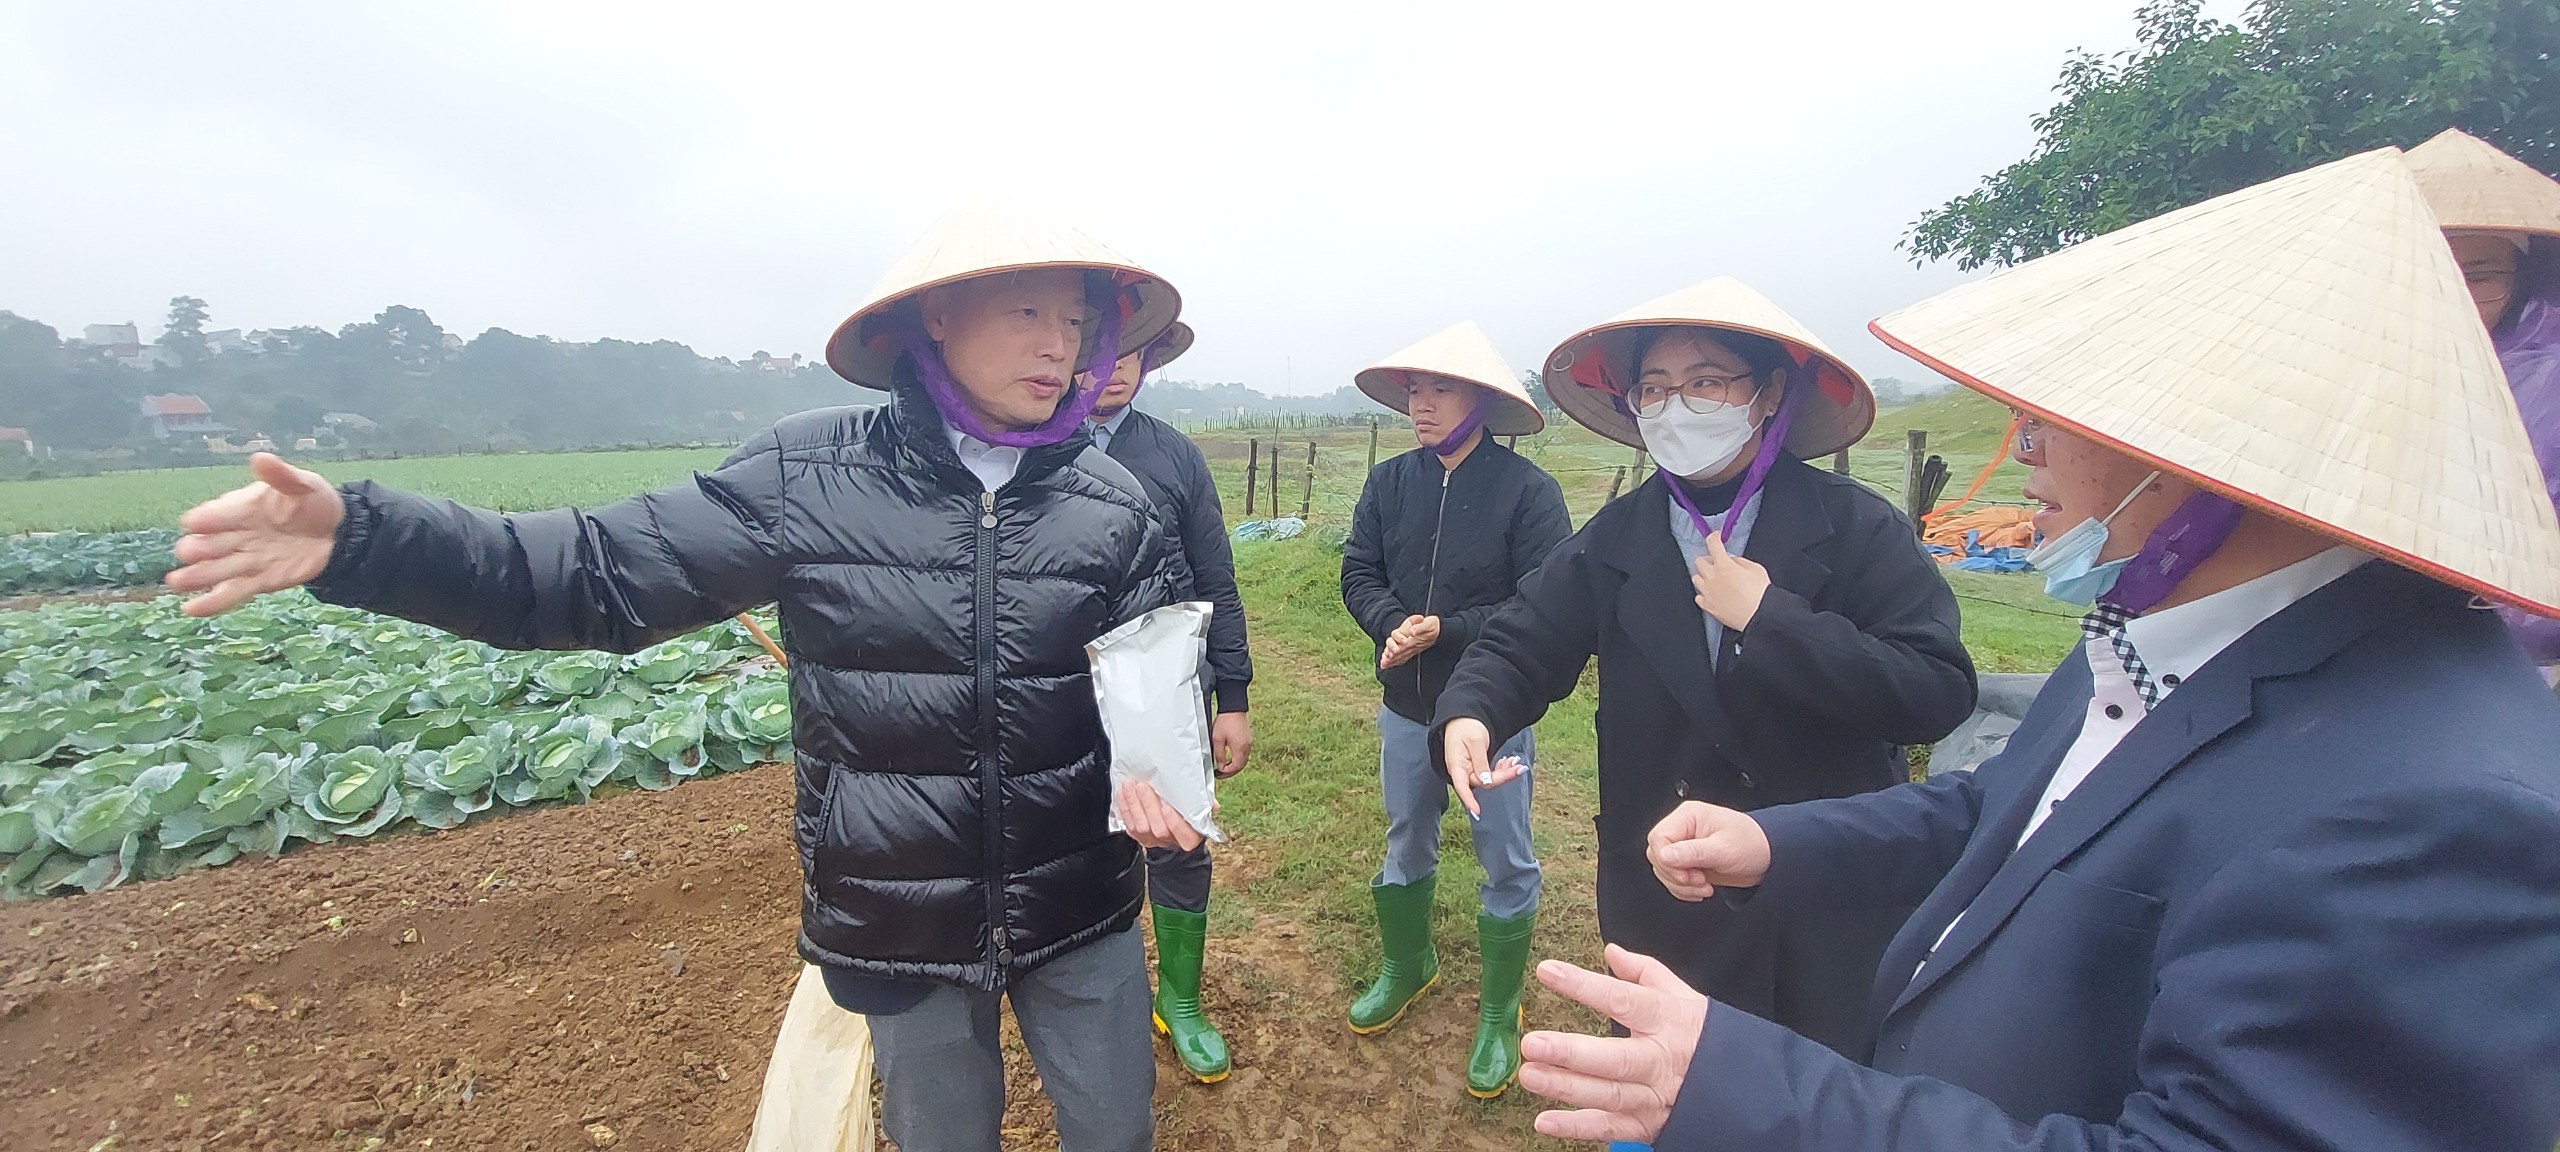 AGRICULTURAL EXPERTS FROM JAPAN INSTRUCTED GOC AGRICULTURAL OFFICERS ON HOW TO SOW PERILLA SEEDS